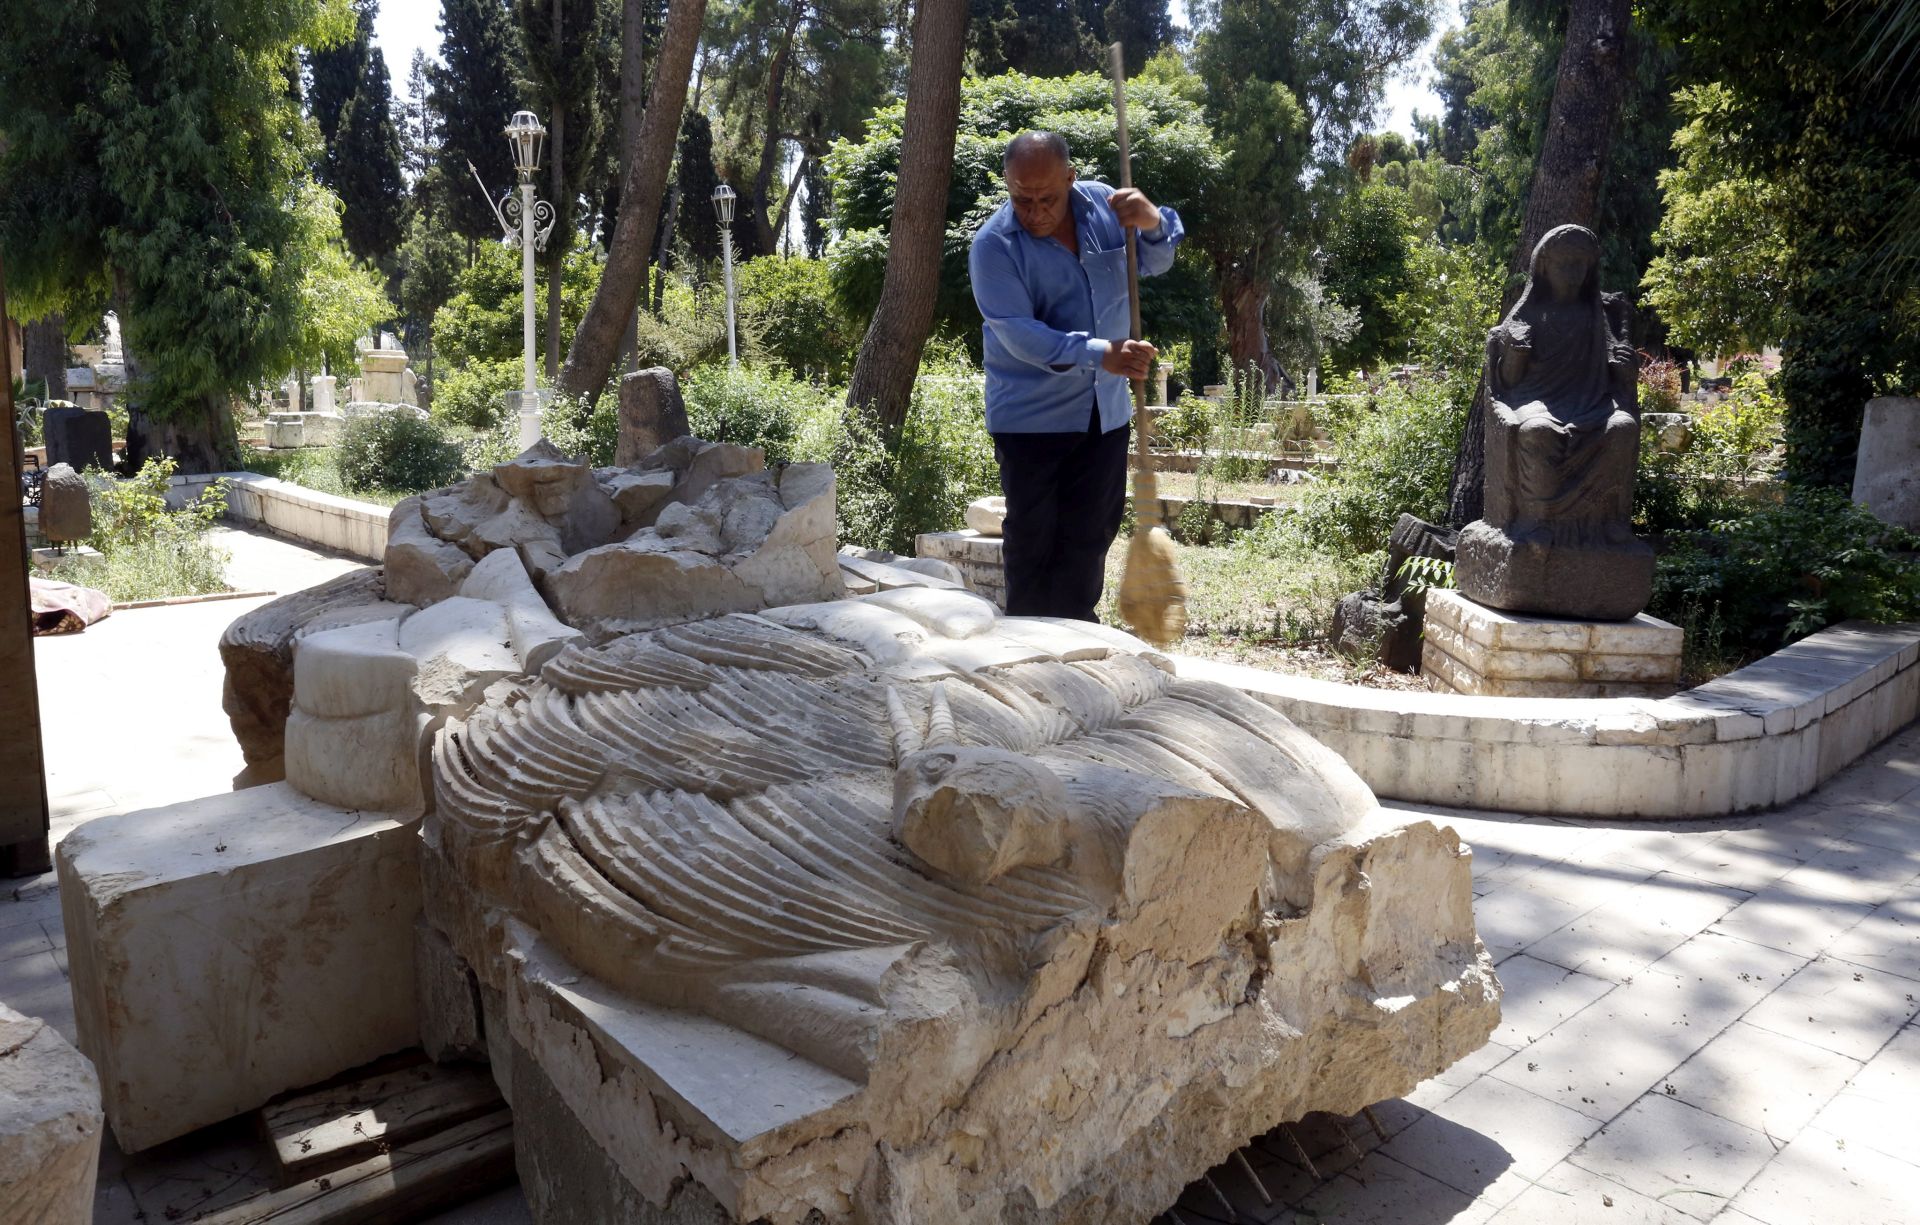 epa05438854 Worker at the National Museum in Damascus cleans the remains of the lion of al-Lat, an 2,000-year-old statue that was destroyed by the Islamic State's militants in the central ancient city of Palmyra in 2015, Damascus, Syria, 24 July 2016. The statue was brought to the National Museum in Damascus for renovation. A Polish mission is expected in Damascus to do the renovation works. The limestone statue was discovered in 1977 by a Polish archaeological mission at the temple of al-Lat, a pre-Islamic Arabian goddess, and dated back to the 1st century BC.  EPA/YOUSSEF BADAWI